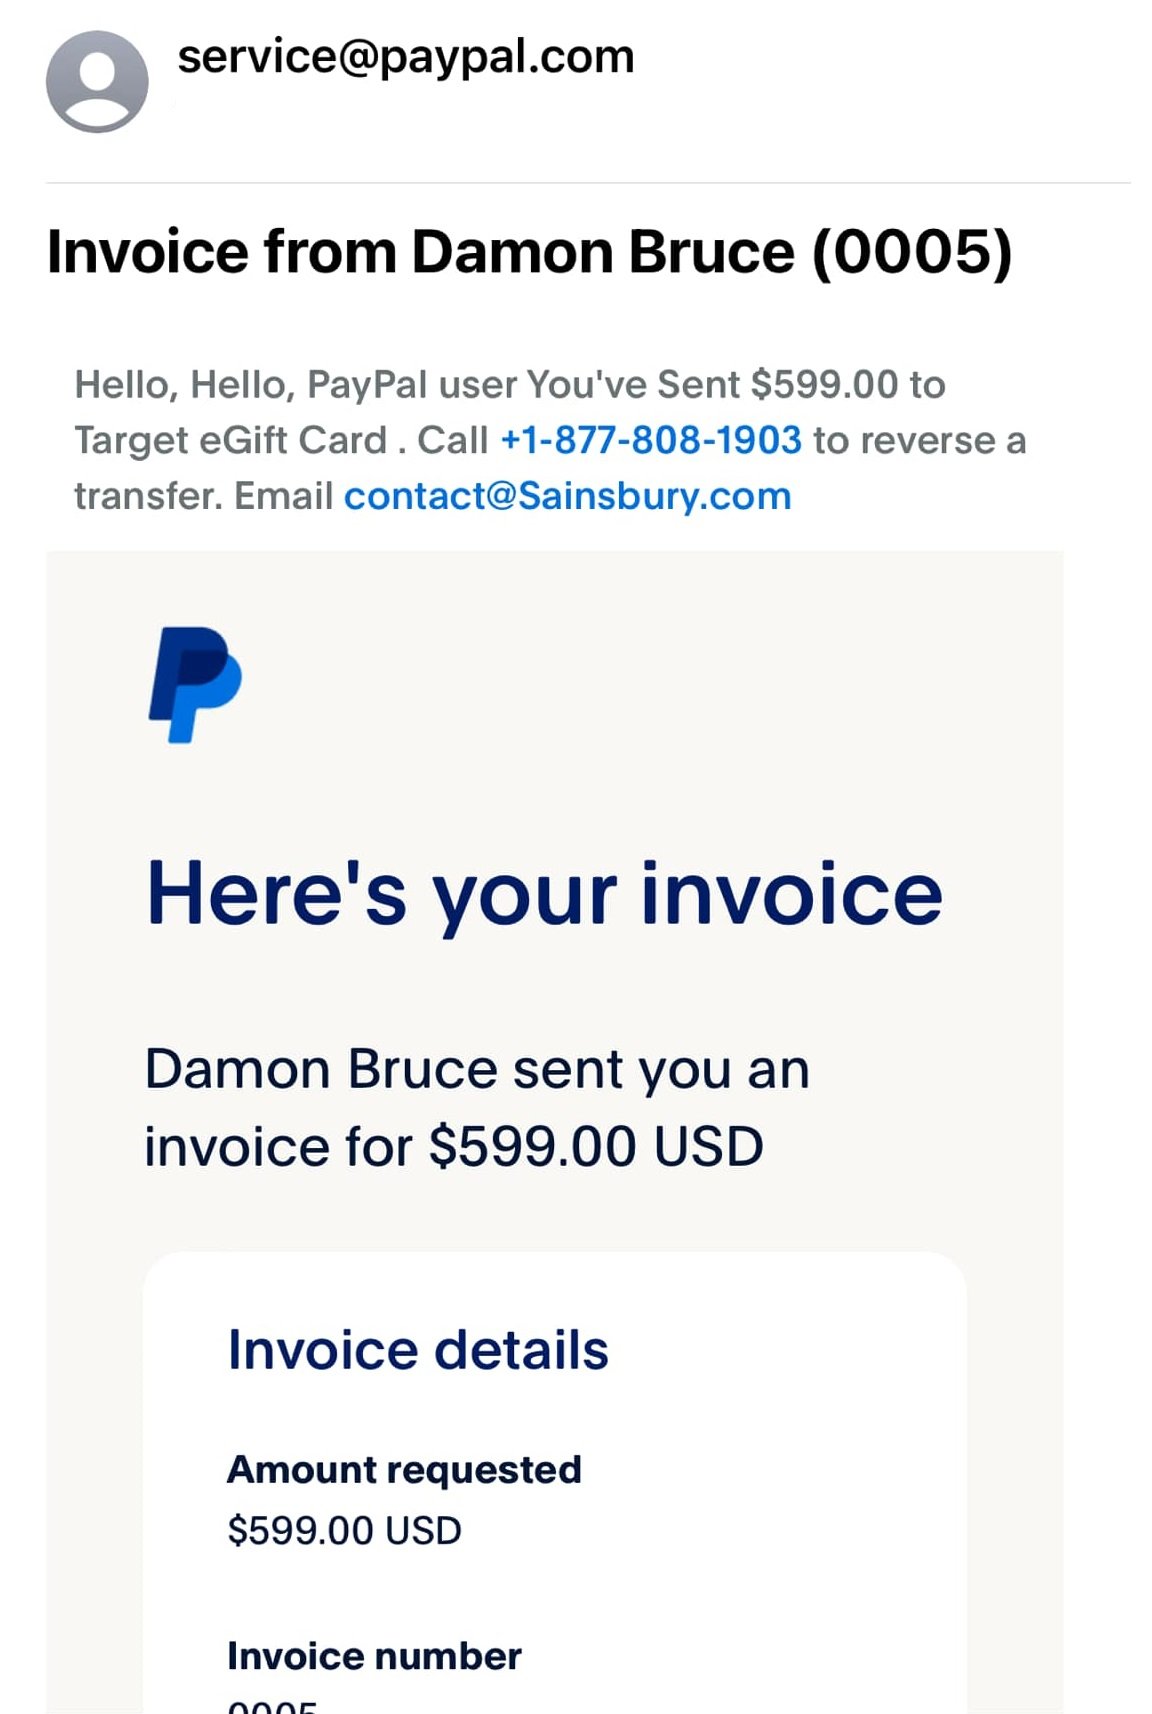 PayPal Scam Email Invoices